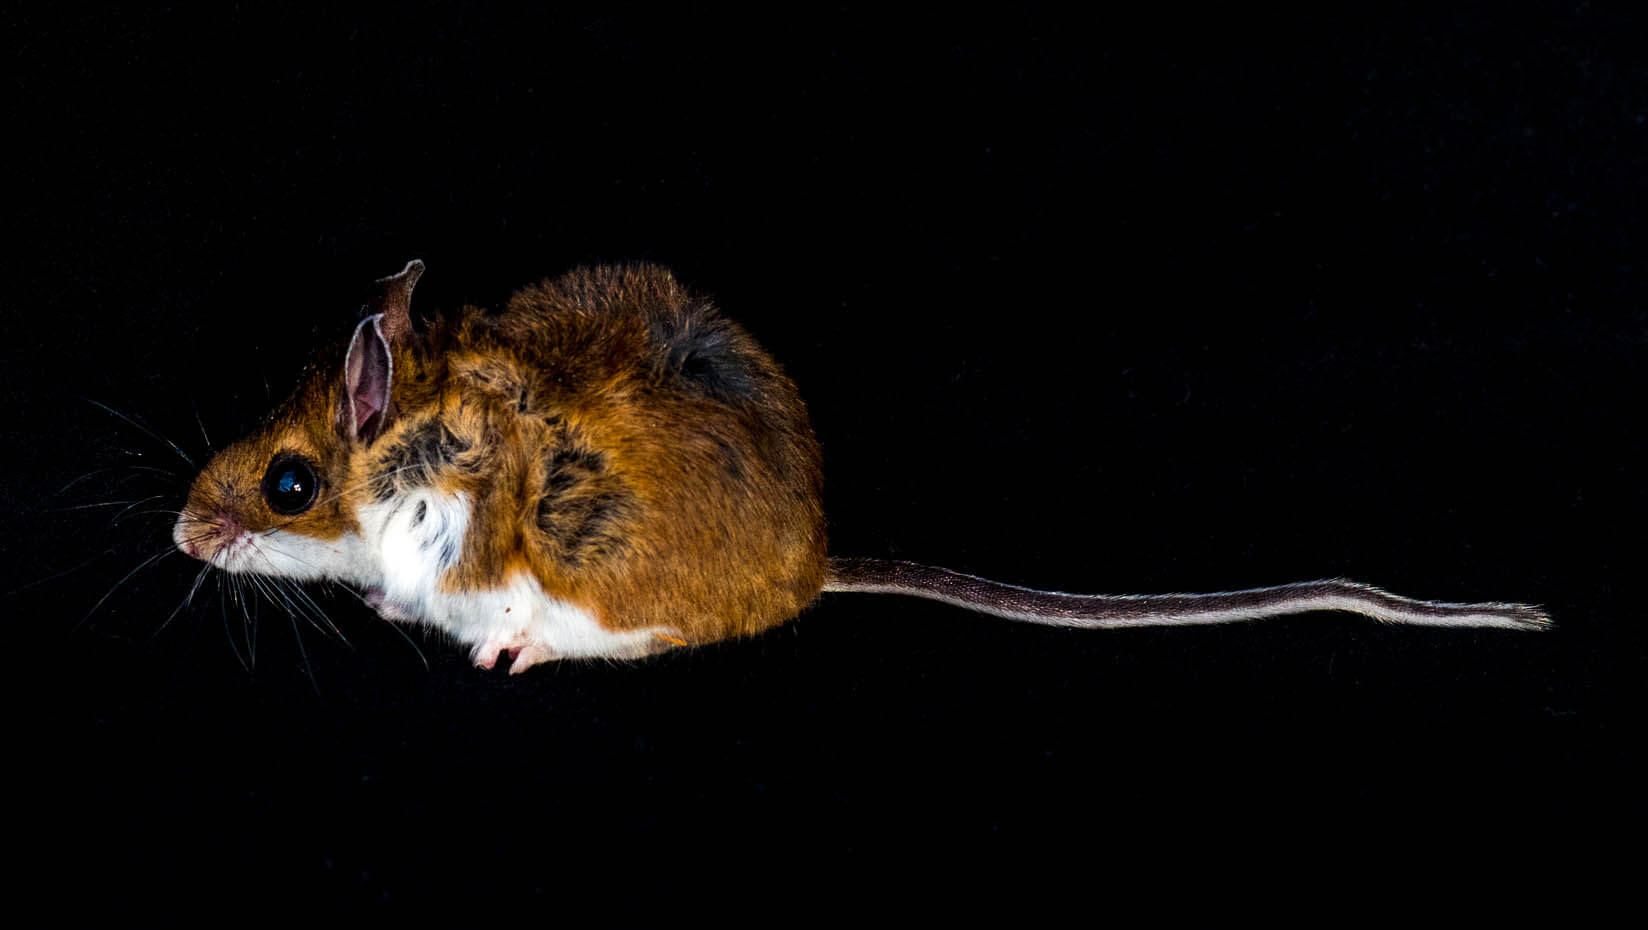 A photo of a mouse on a black background